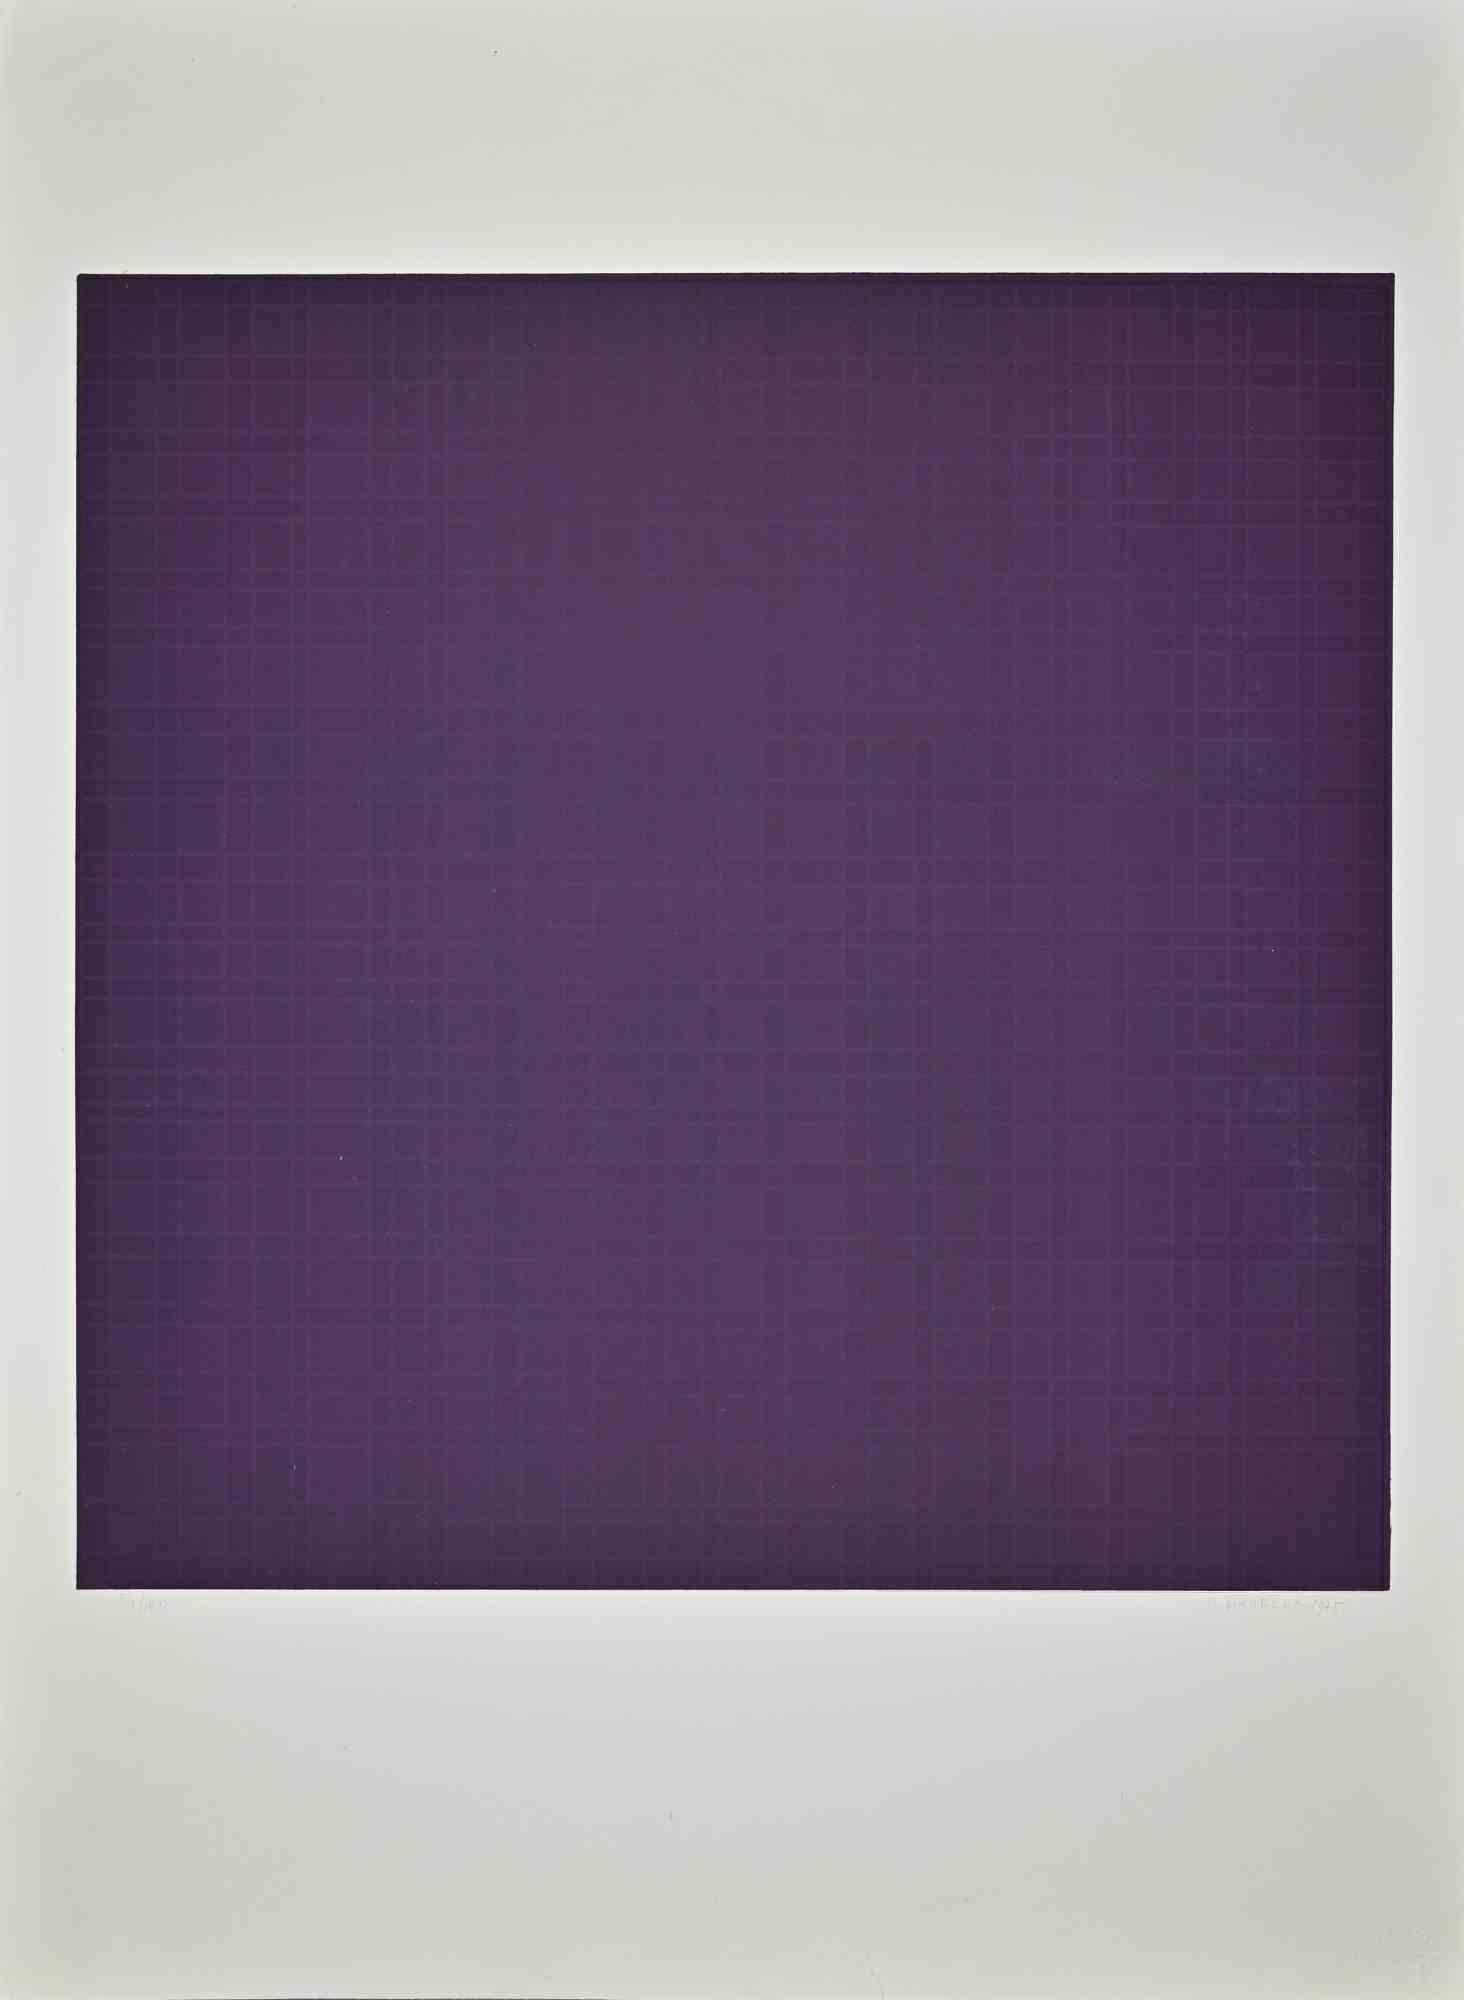 Violet composition is an original artwork realized in 1975 by Oscar Piattella.

Hand signed, dated on the lower right margin.

Numbered on the lower left. Edition of 54/100 prints.

Printed by Stamperia Posterula.

Good conditions except for very